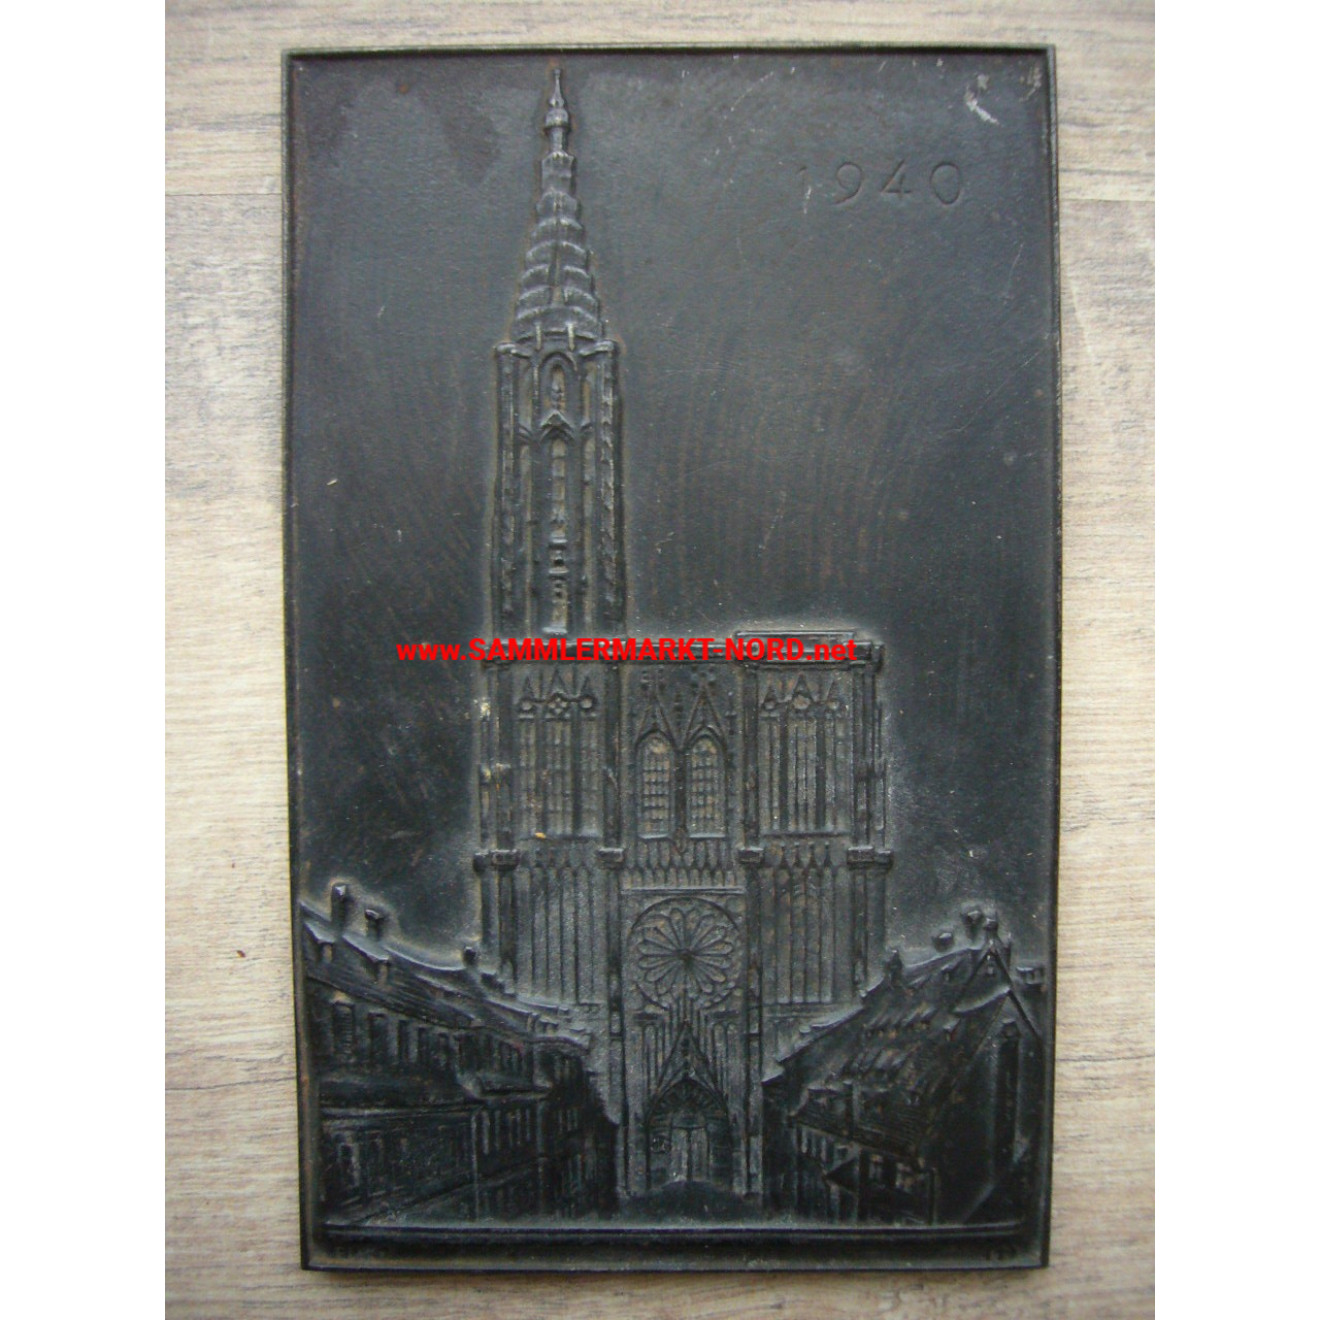 Strasbourg Cathedral (Alsace) 1940 - Cast iron plaque